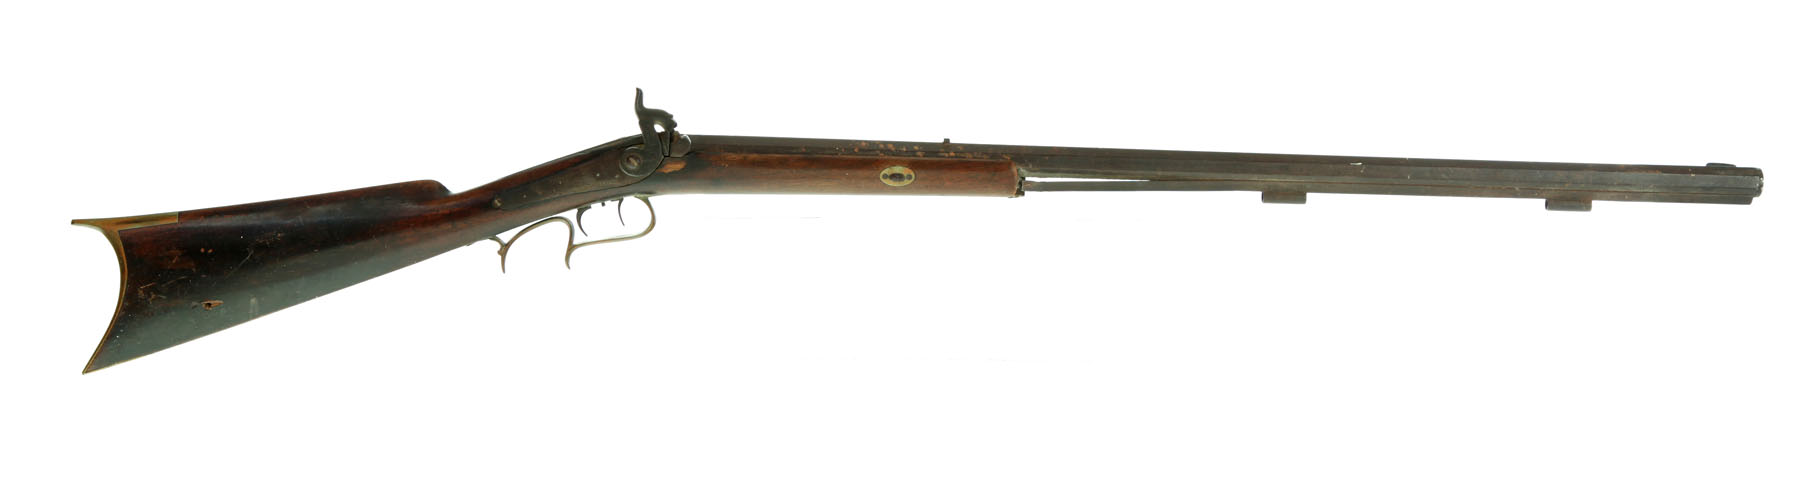 HALF STOCK PERCUSSION RIFLE Marked 117088